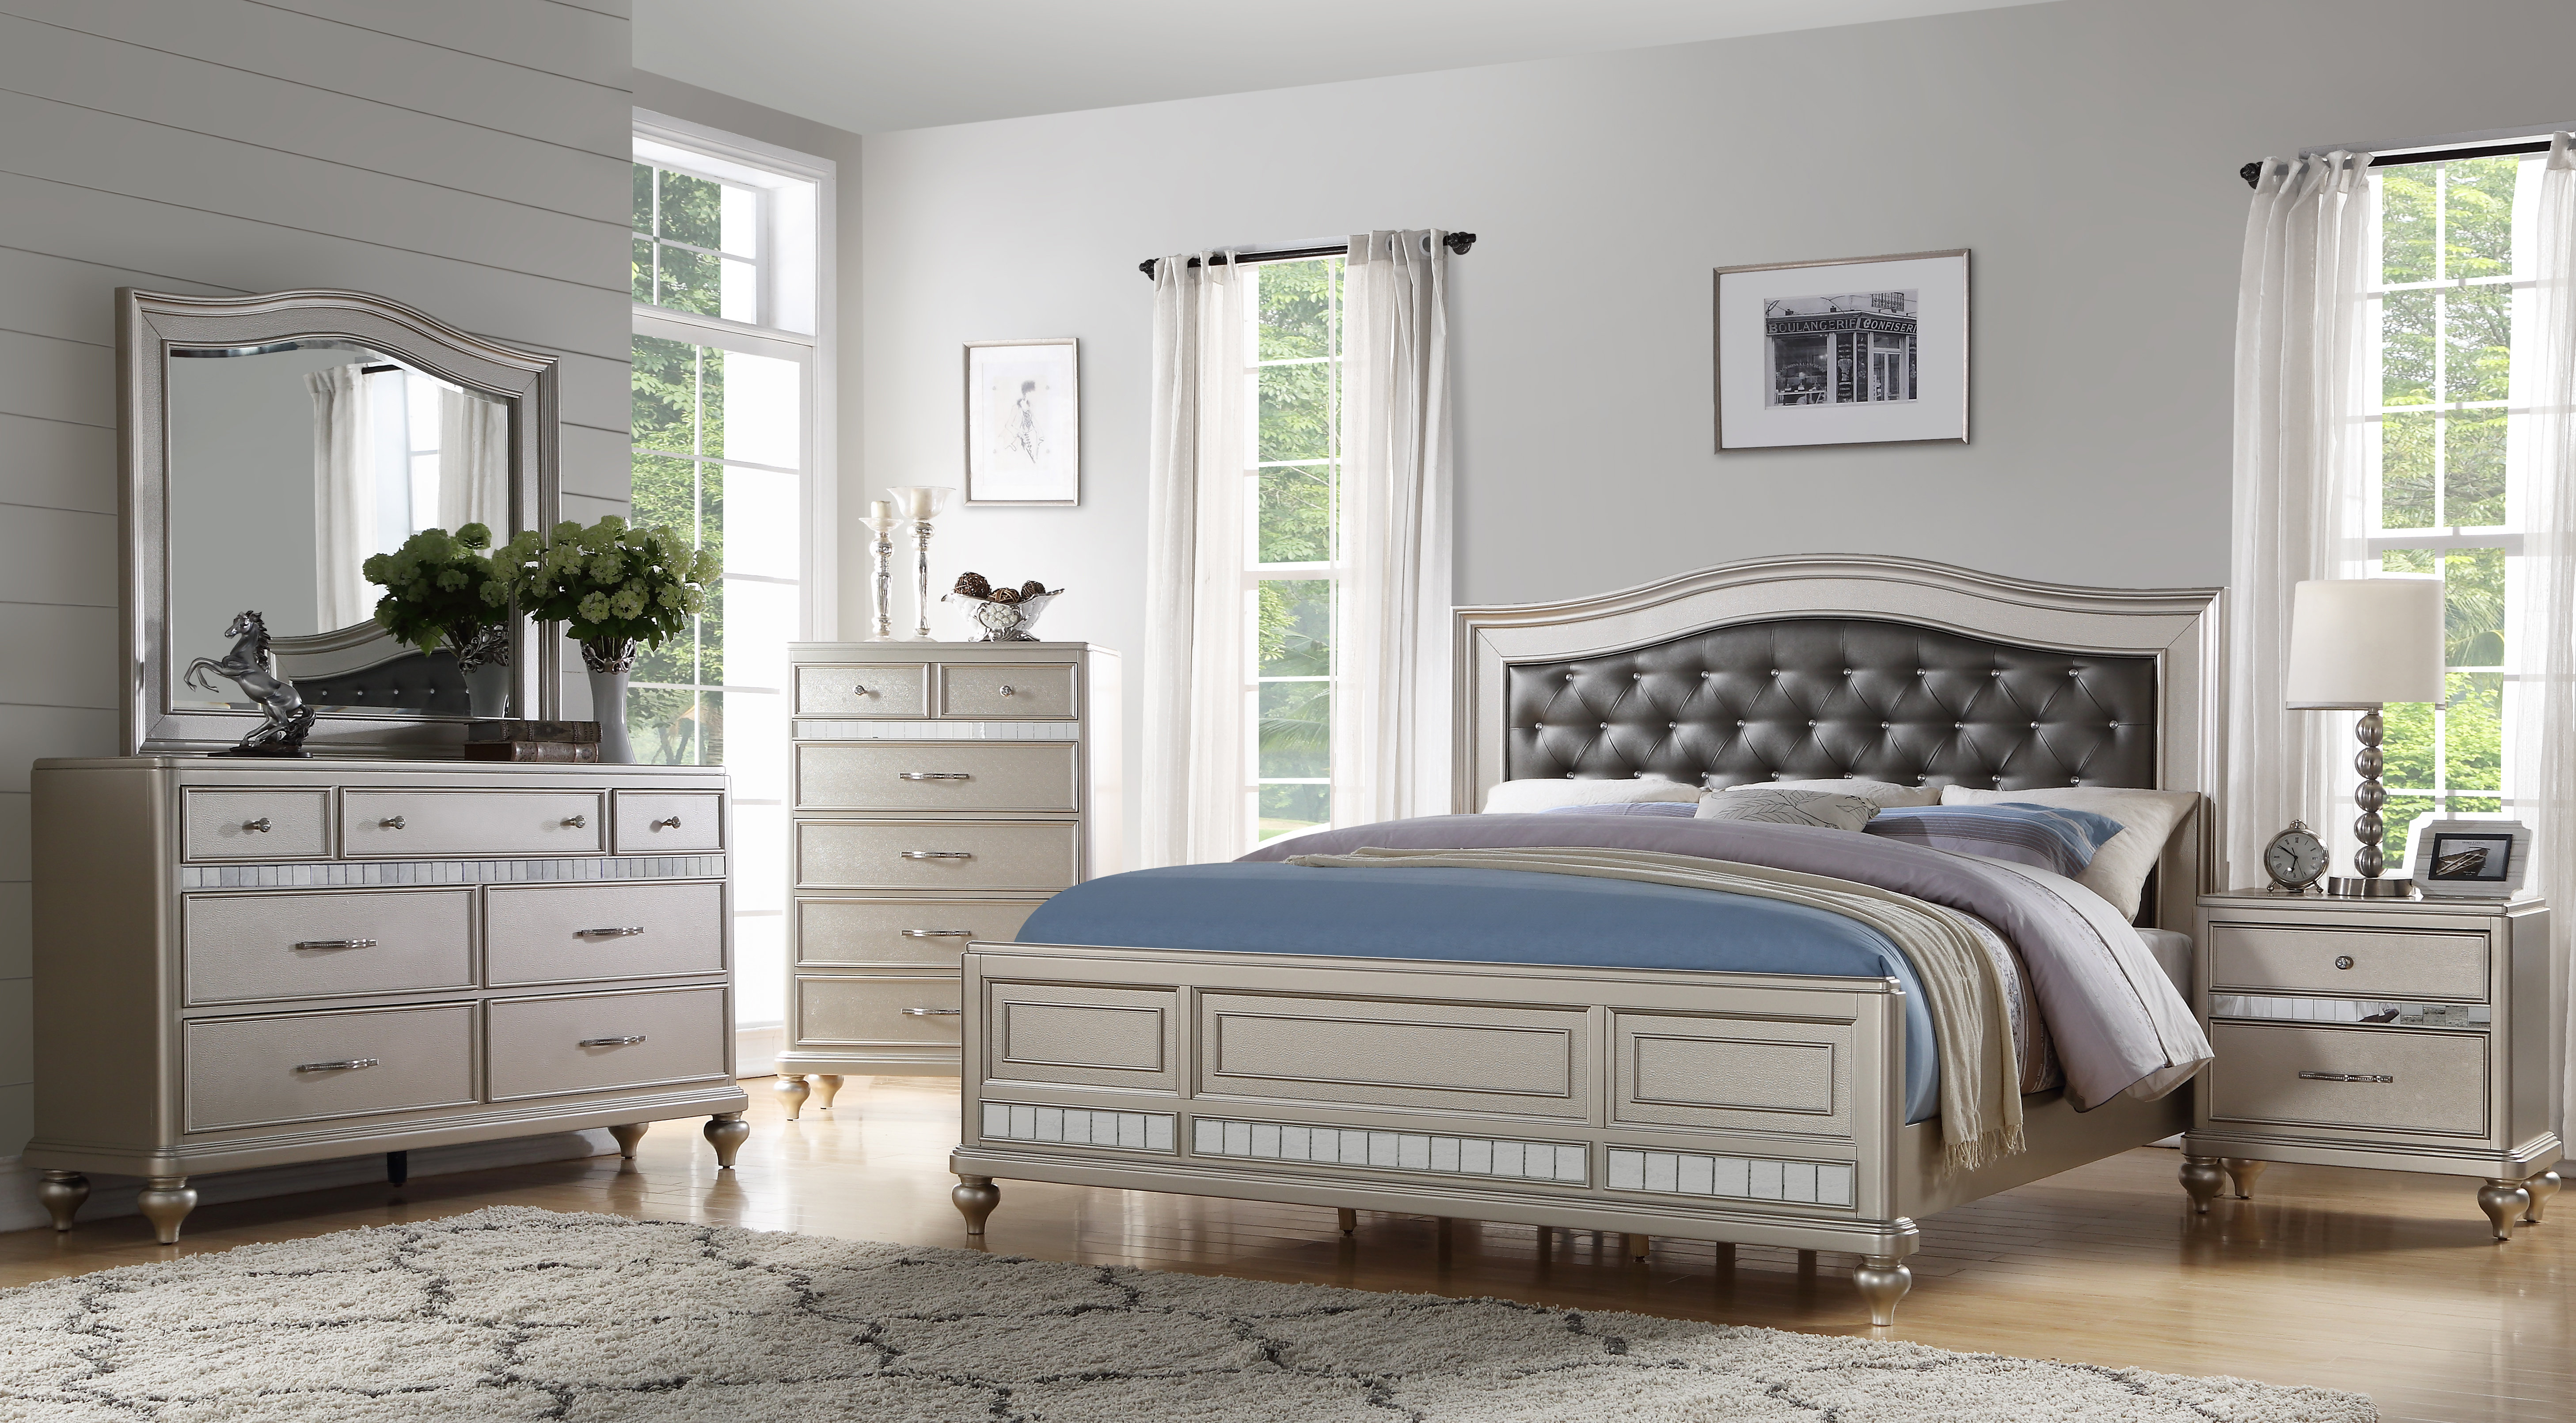 Keytesville 4 Piece Bedroom Set with regard to proportions 5830 X 3220